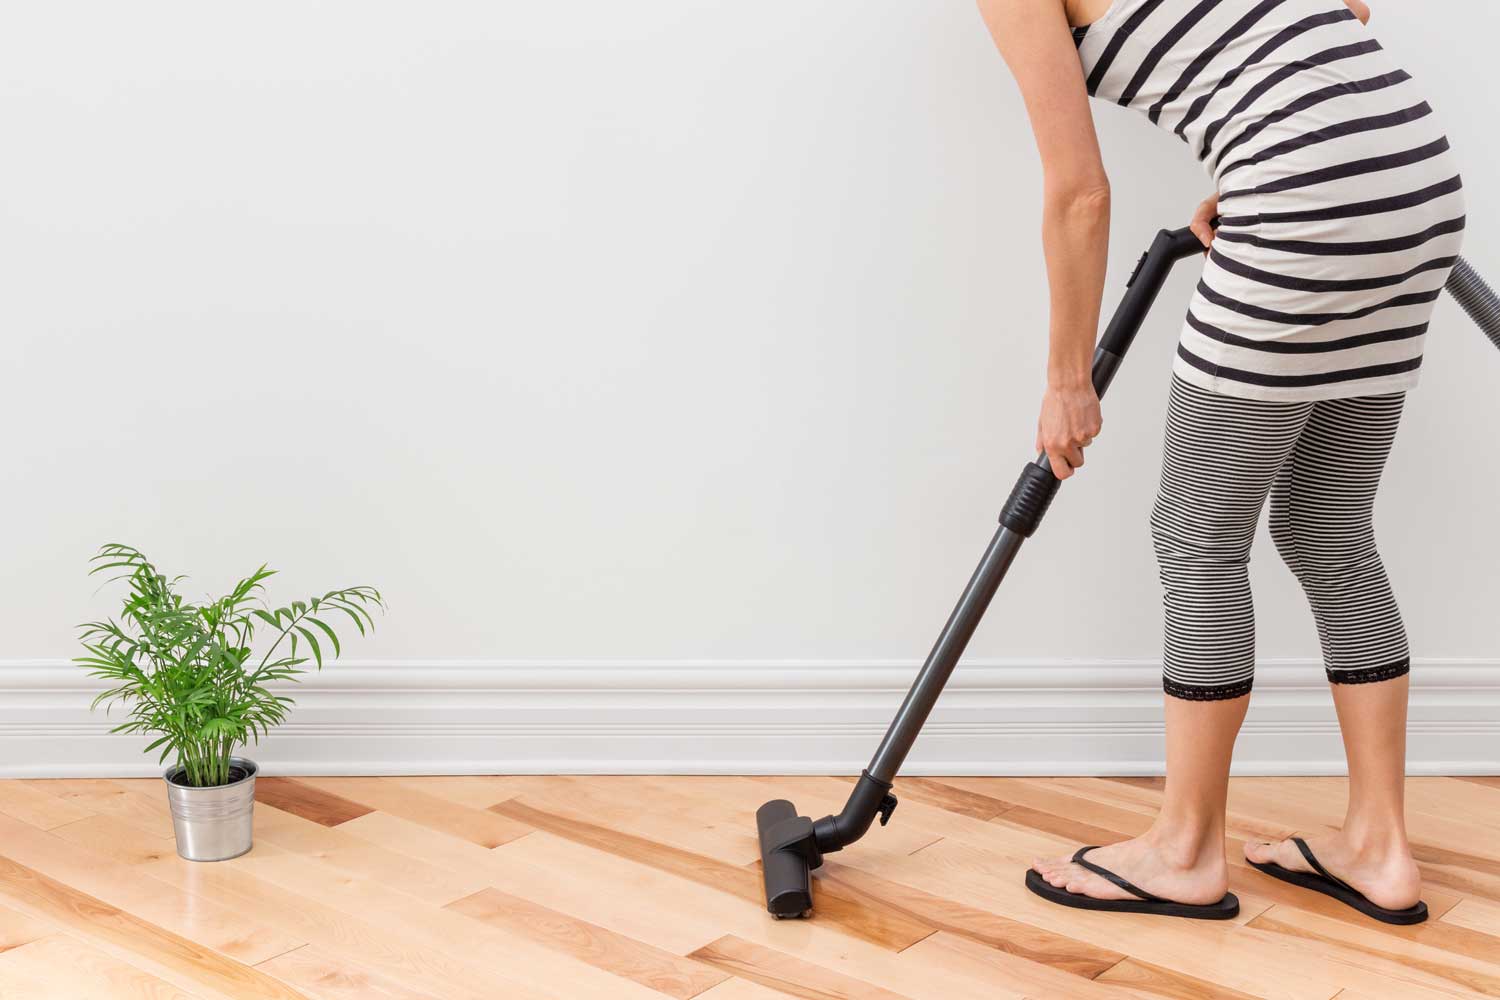 Regulary vacuum or sweep floors to remove dirt and keep your home floors looking amazing - tips from Footprints Floors in Akron / Canton.